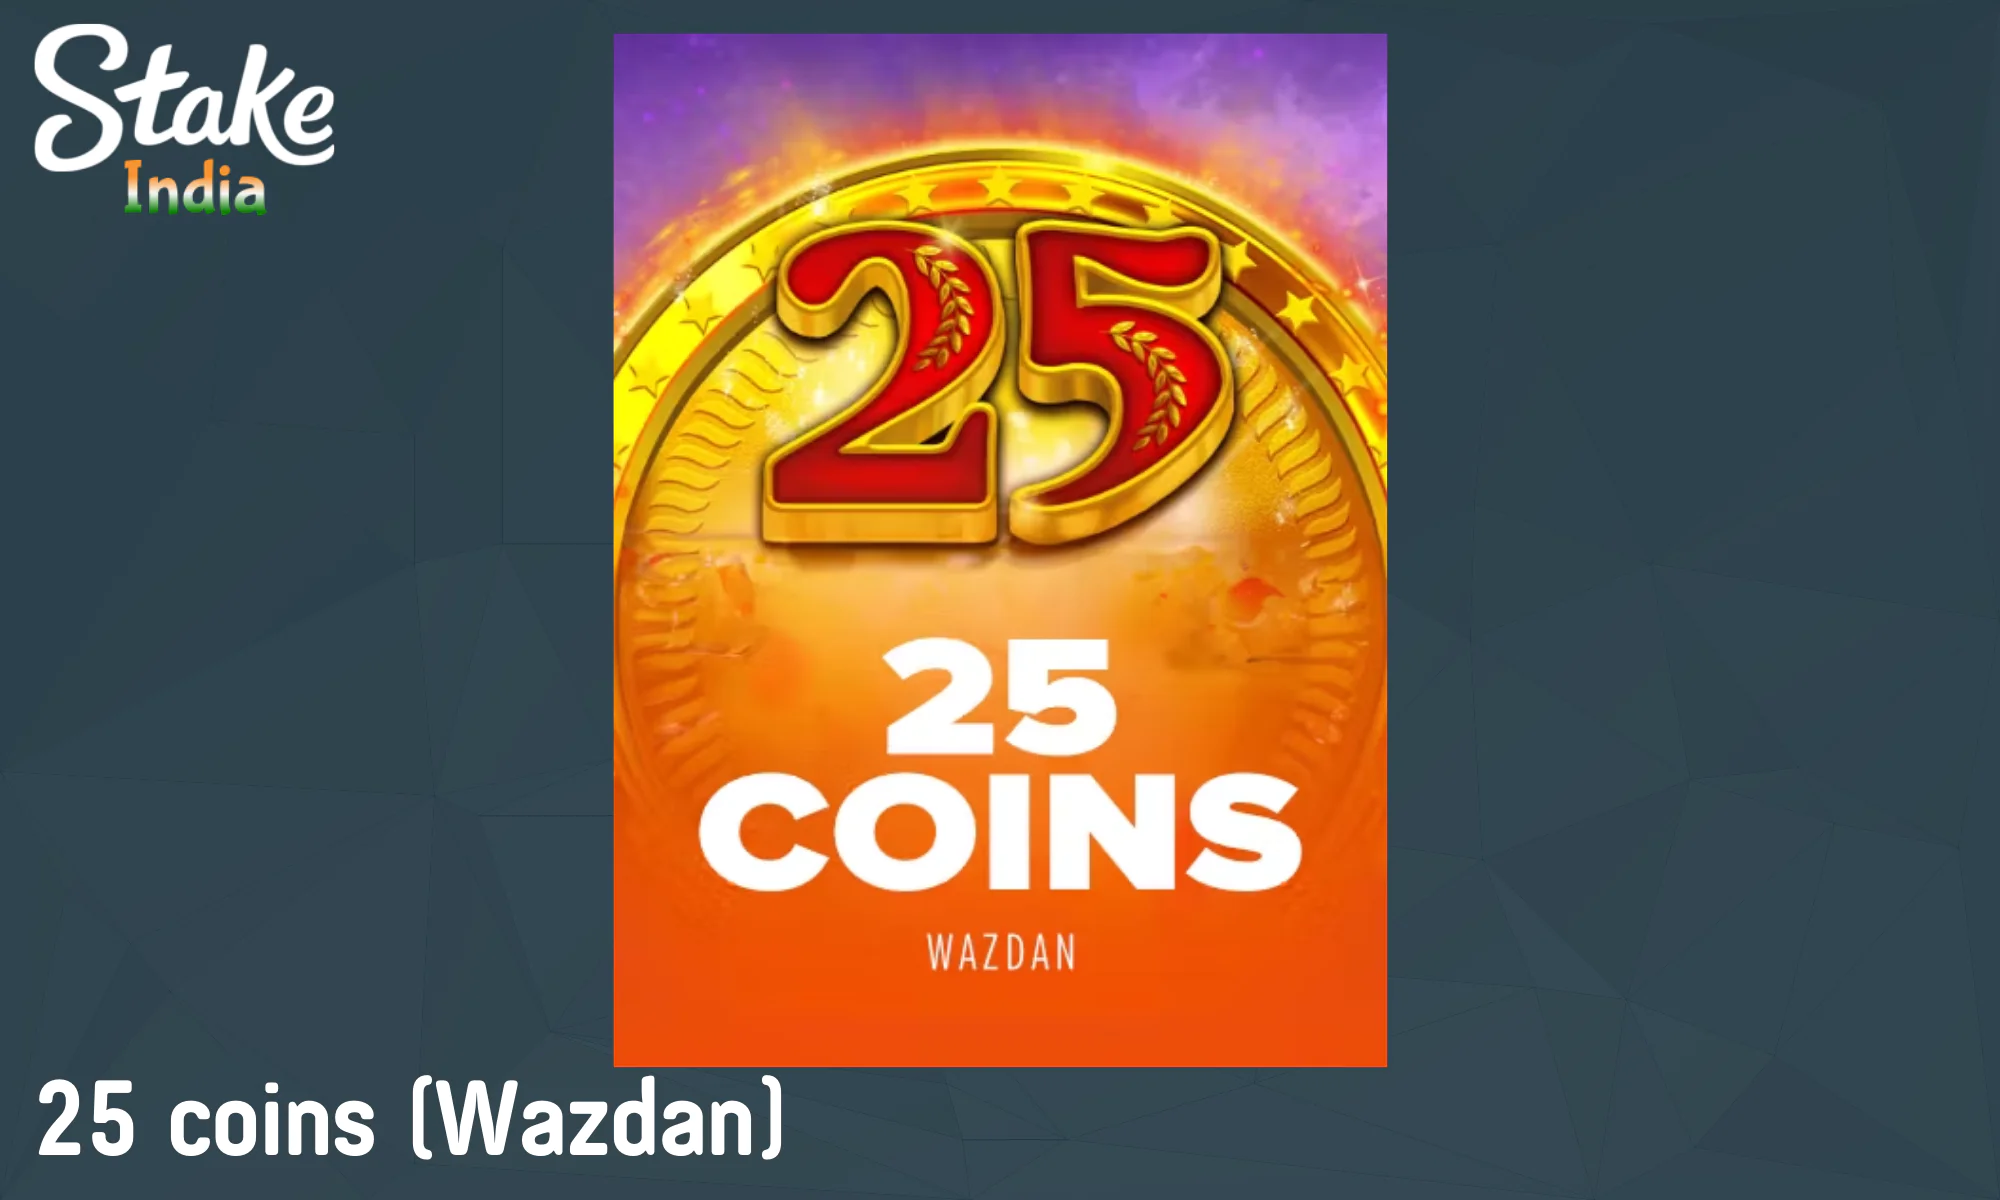 25 coins simple and reliable slot with high wins in Stake